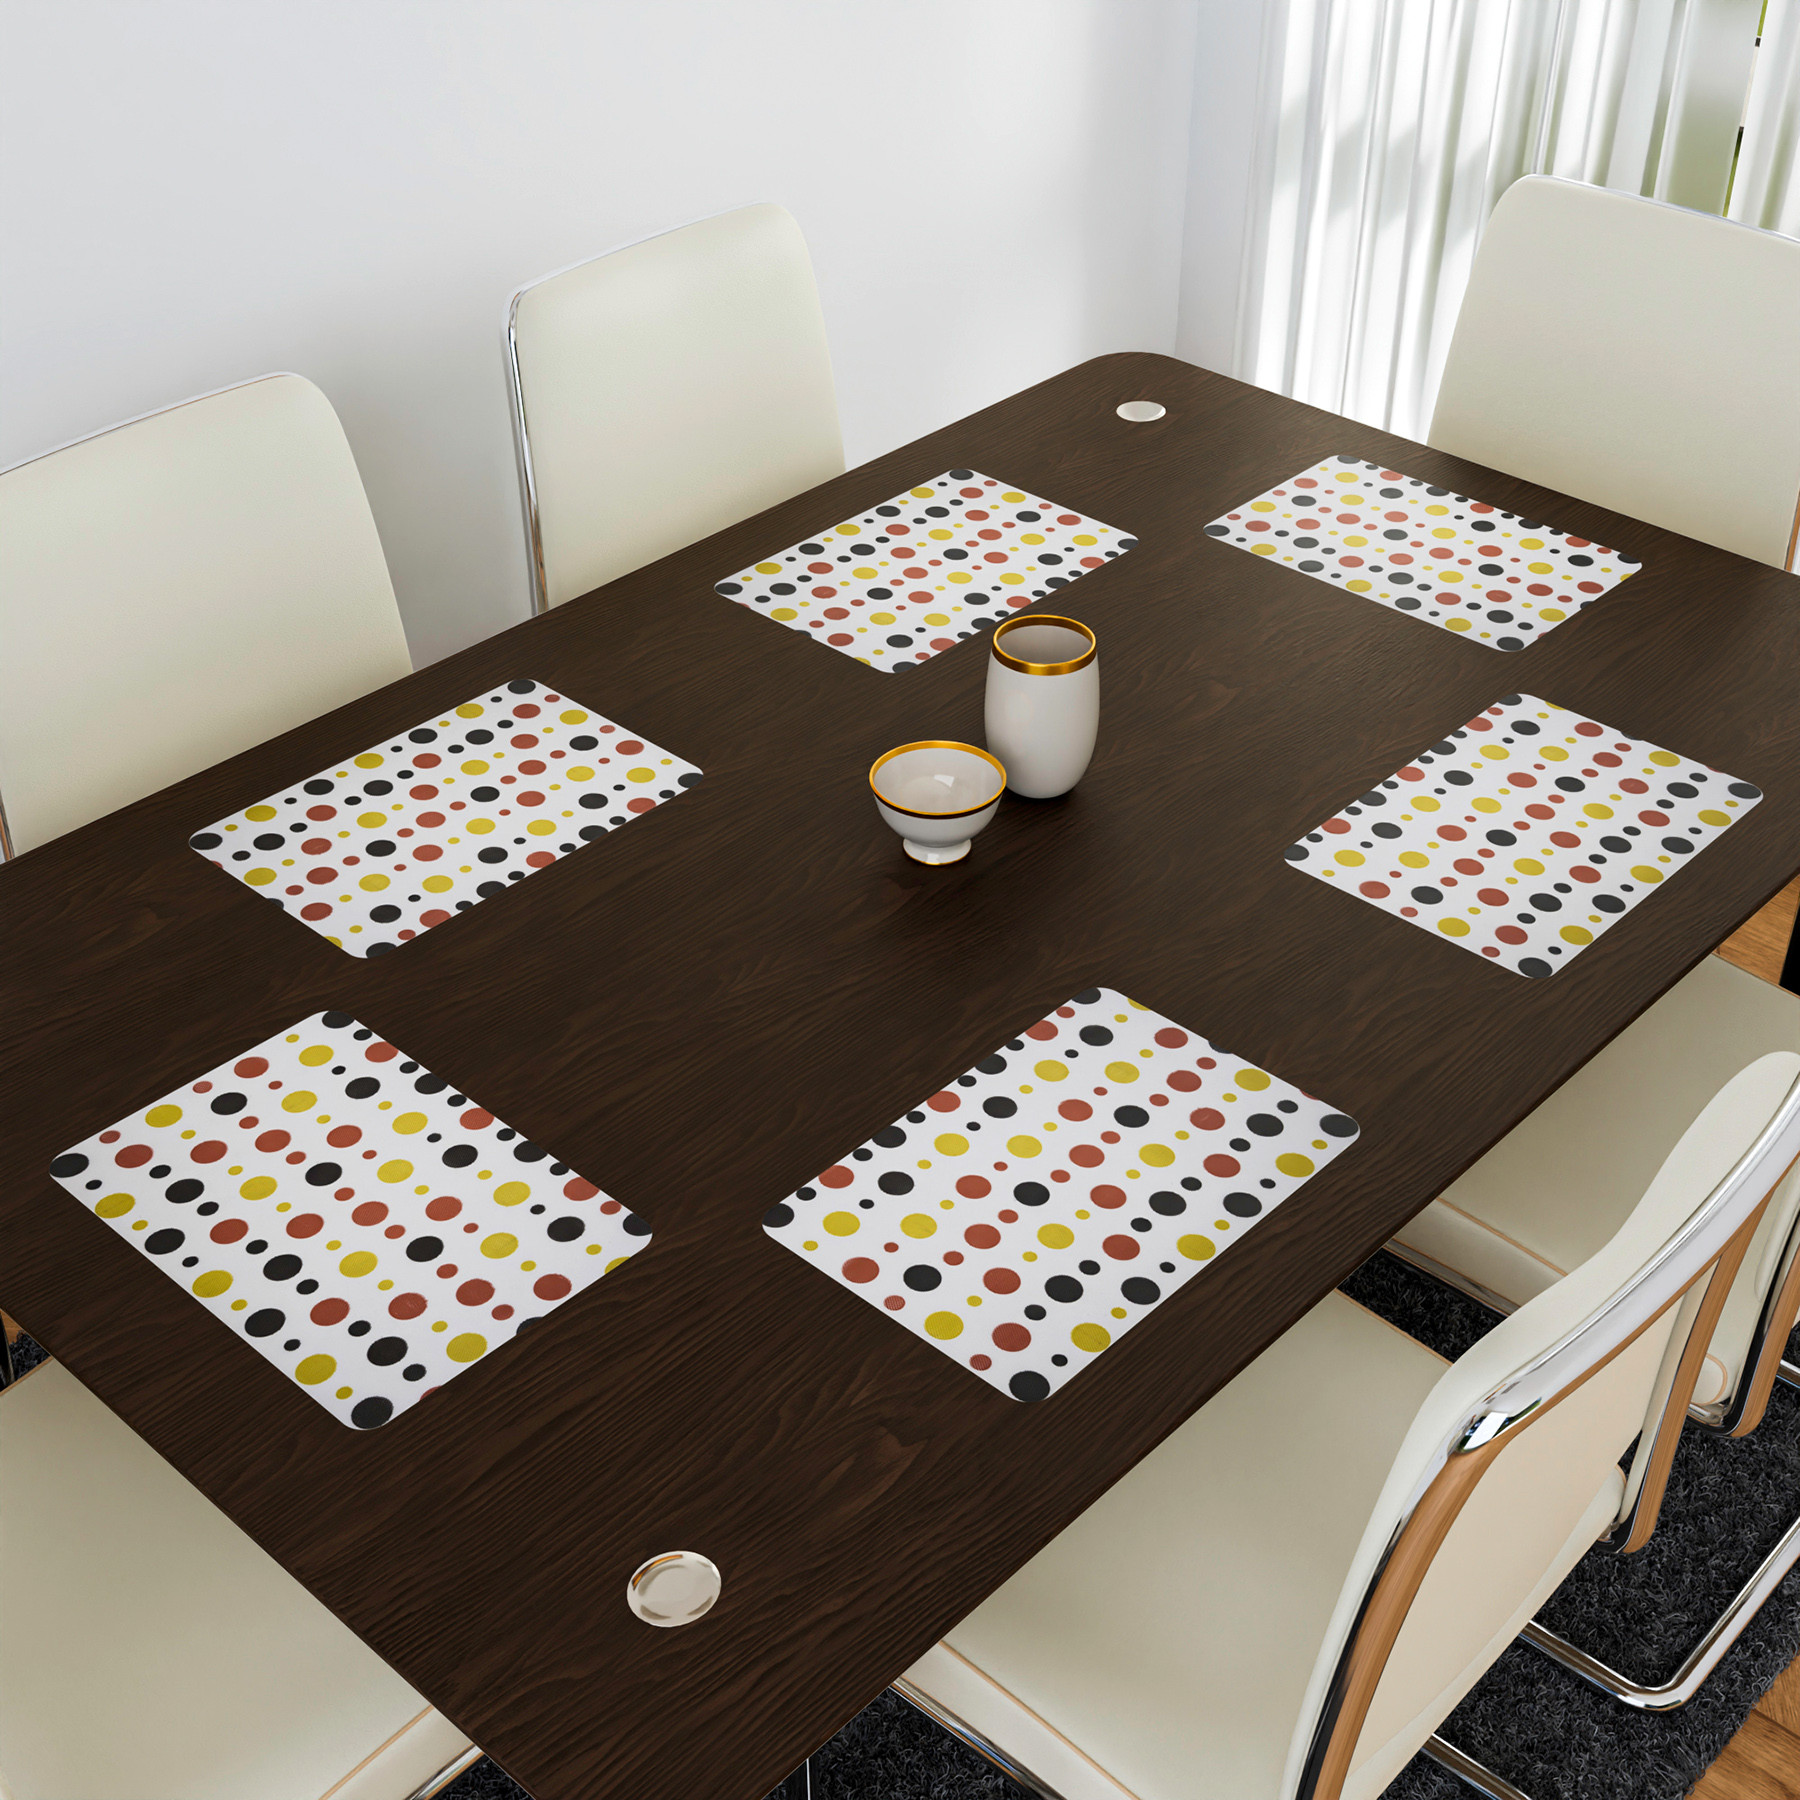 Kuber Industries Placemat | Placemats for Dining Room | Anti-Slip Table Mat Set | Placemats for Kitchen Table | Dining Table Placemats | Multi Dot Placemat | 6 Piece Set | White